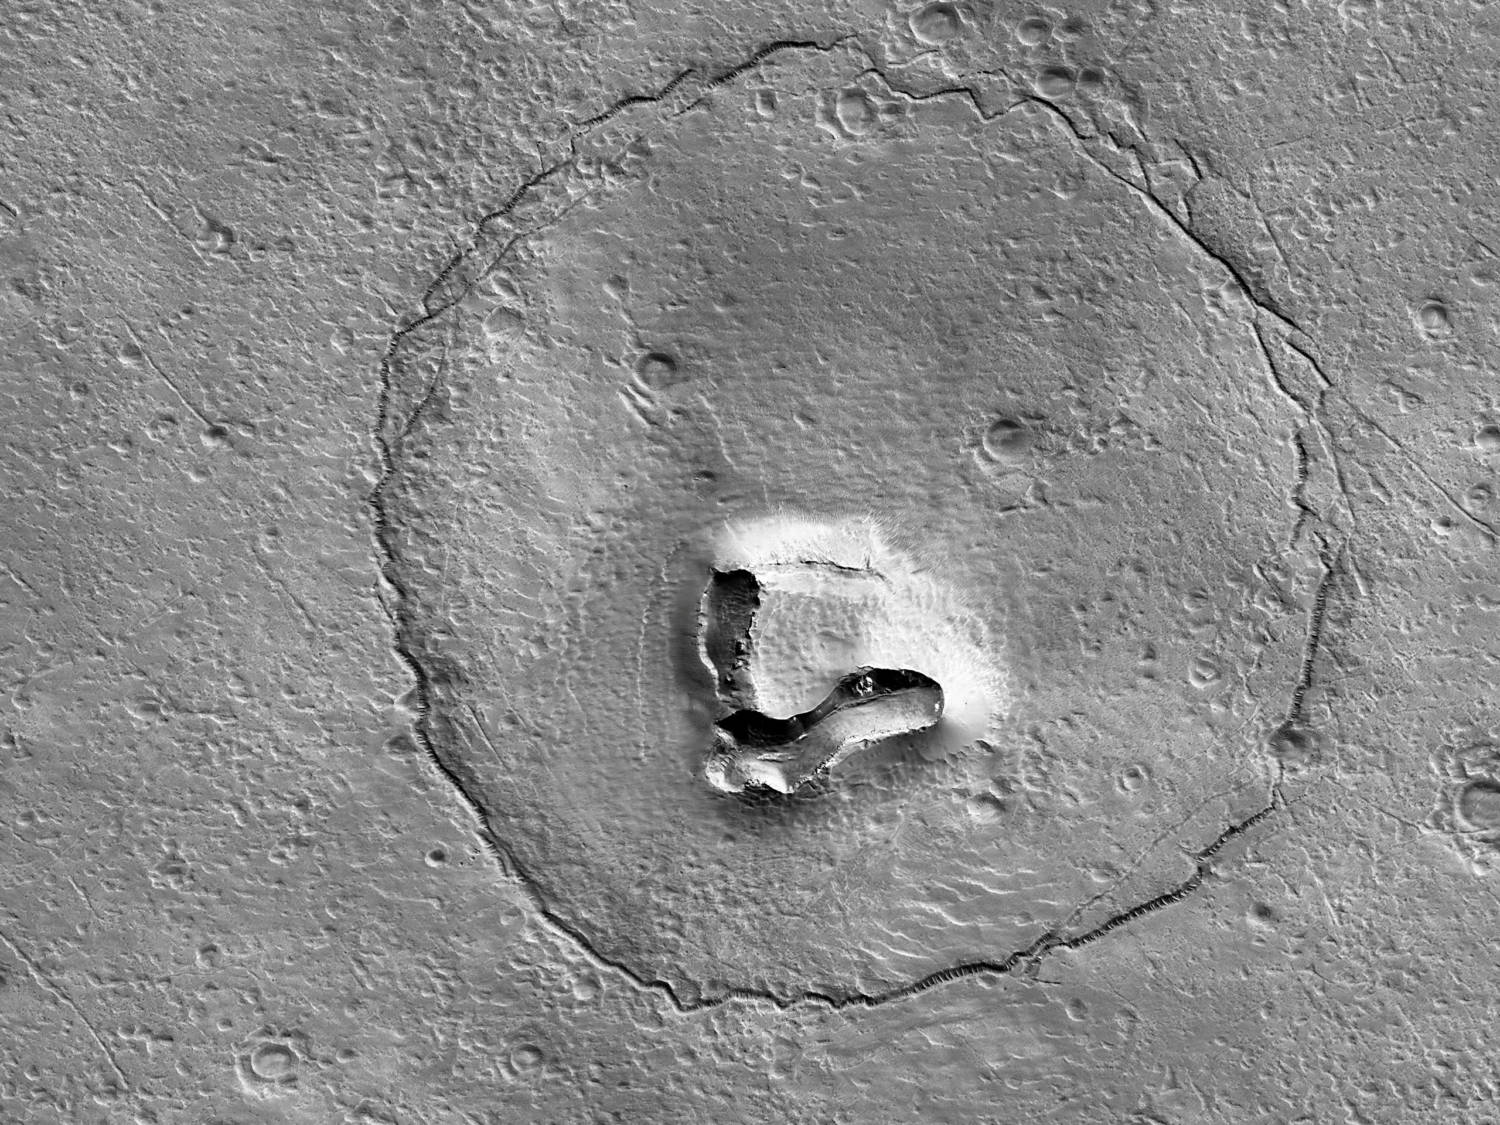 An Undated Image From Nasa's Mars Reconnaissance Orbiter Shows Hills, Craters And A Circular Fracture Pattern On The Surface Of Mars